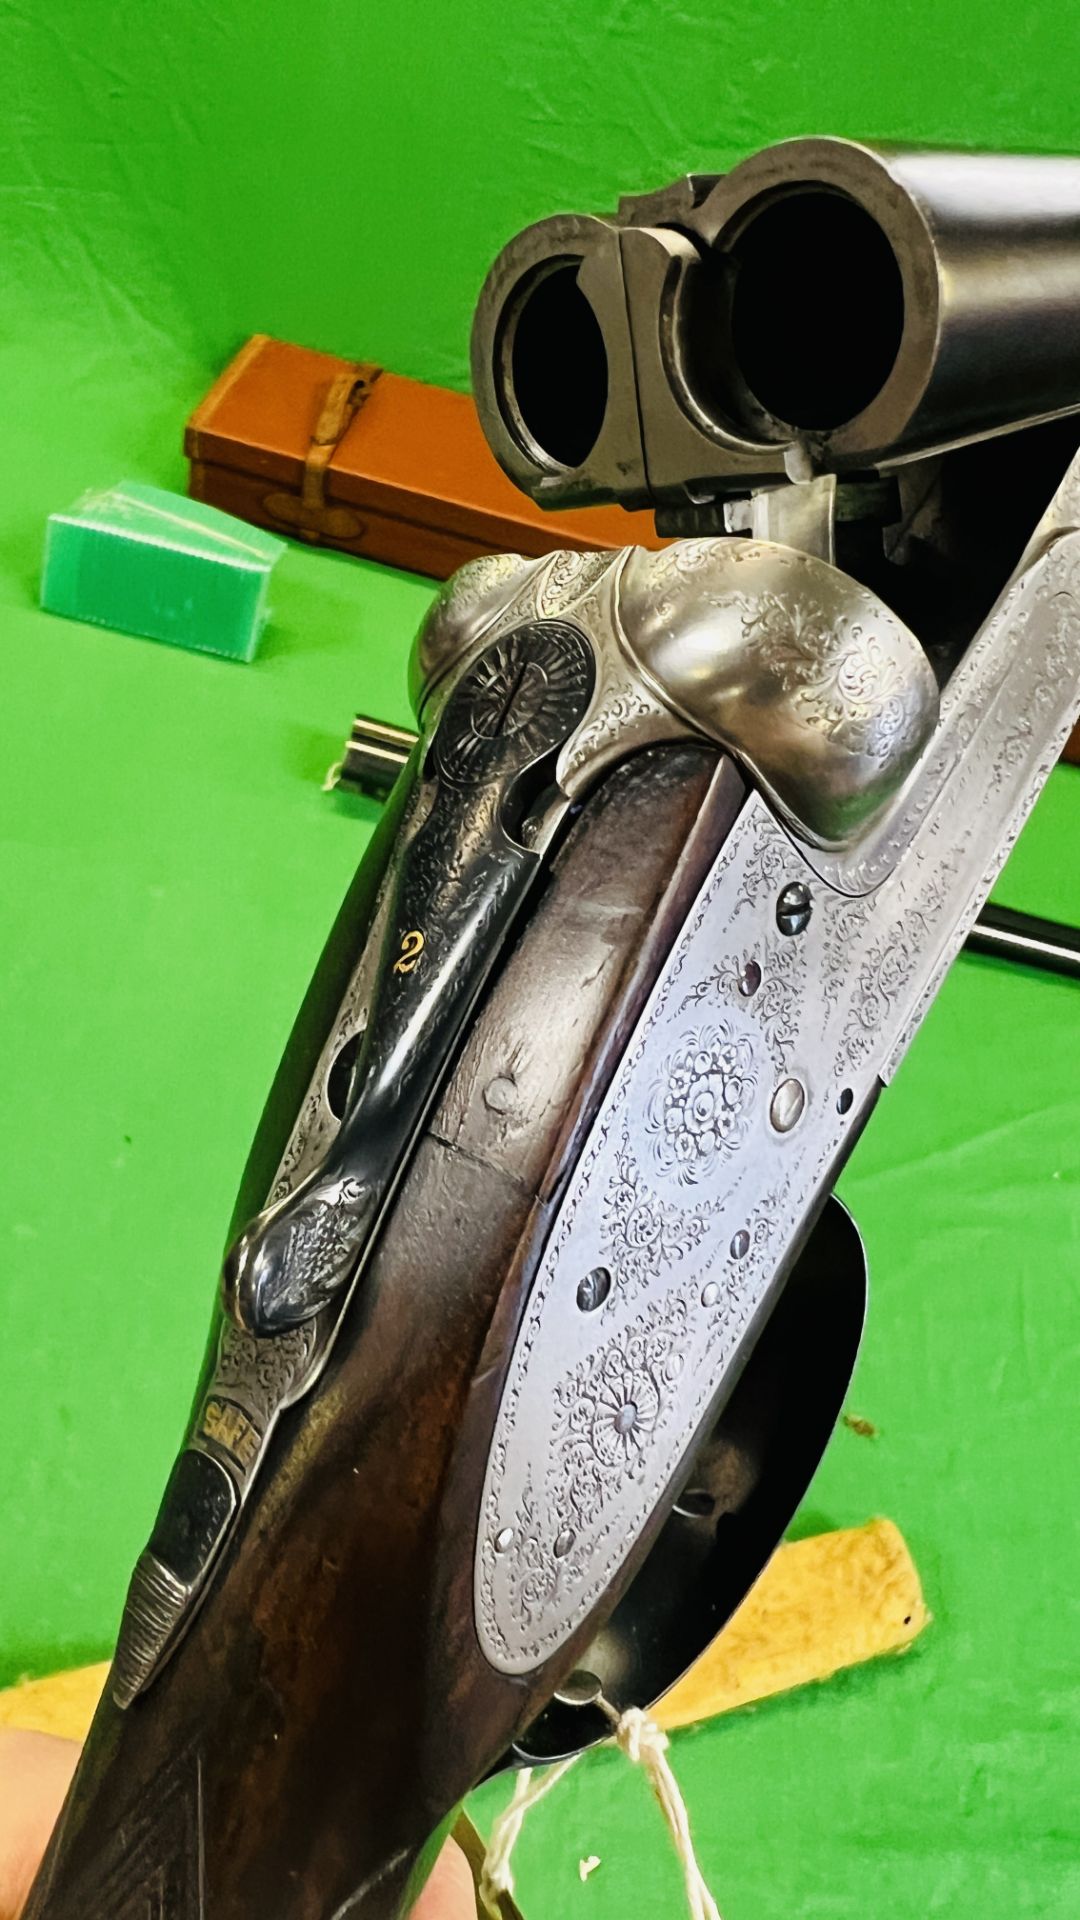 12 BORE TOLLEY SIDE BY SIDE SHOTGUN #8670, 28" BARRELS (2 3/4" CHAMBER), EJECTOR, - Image 24 of 37